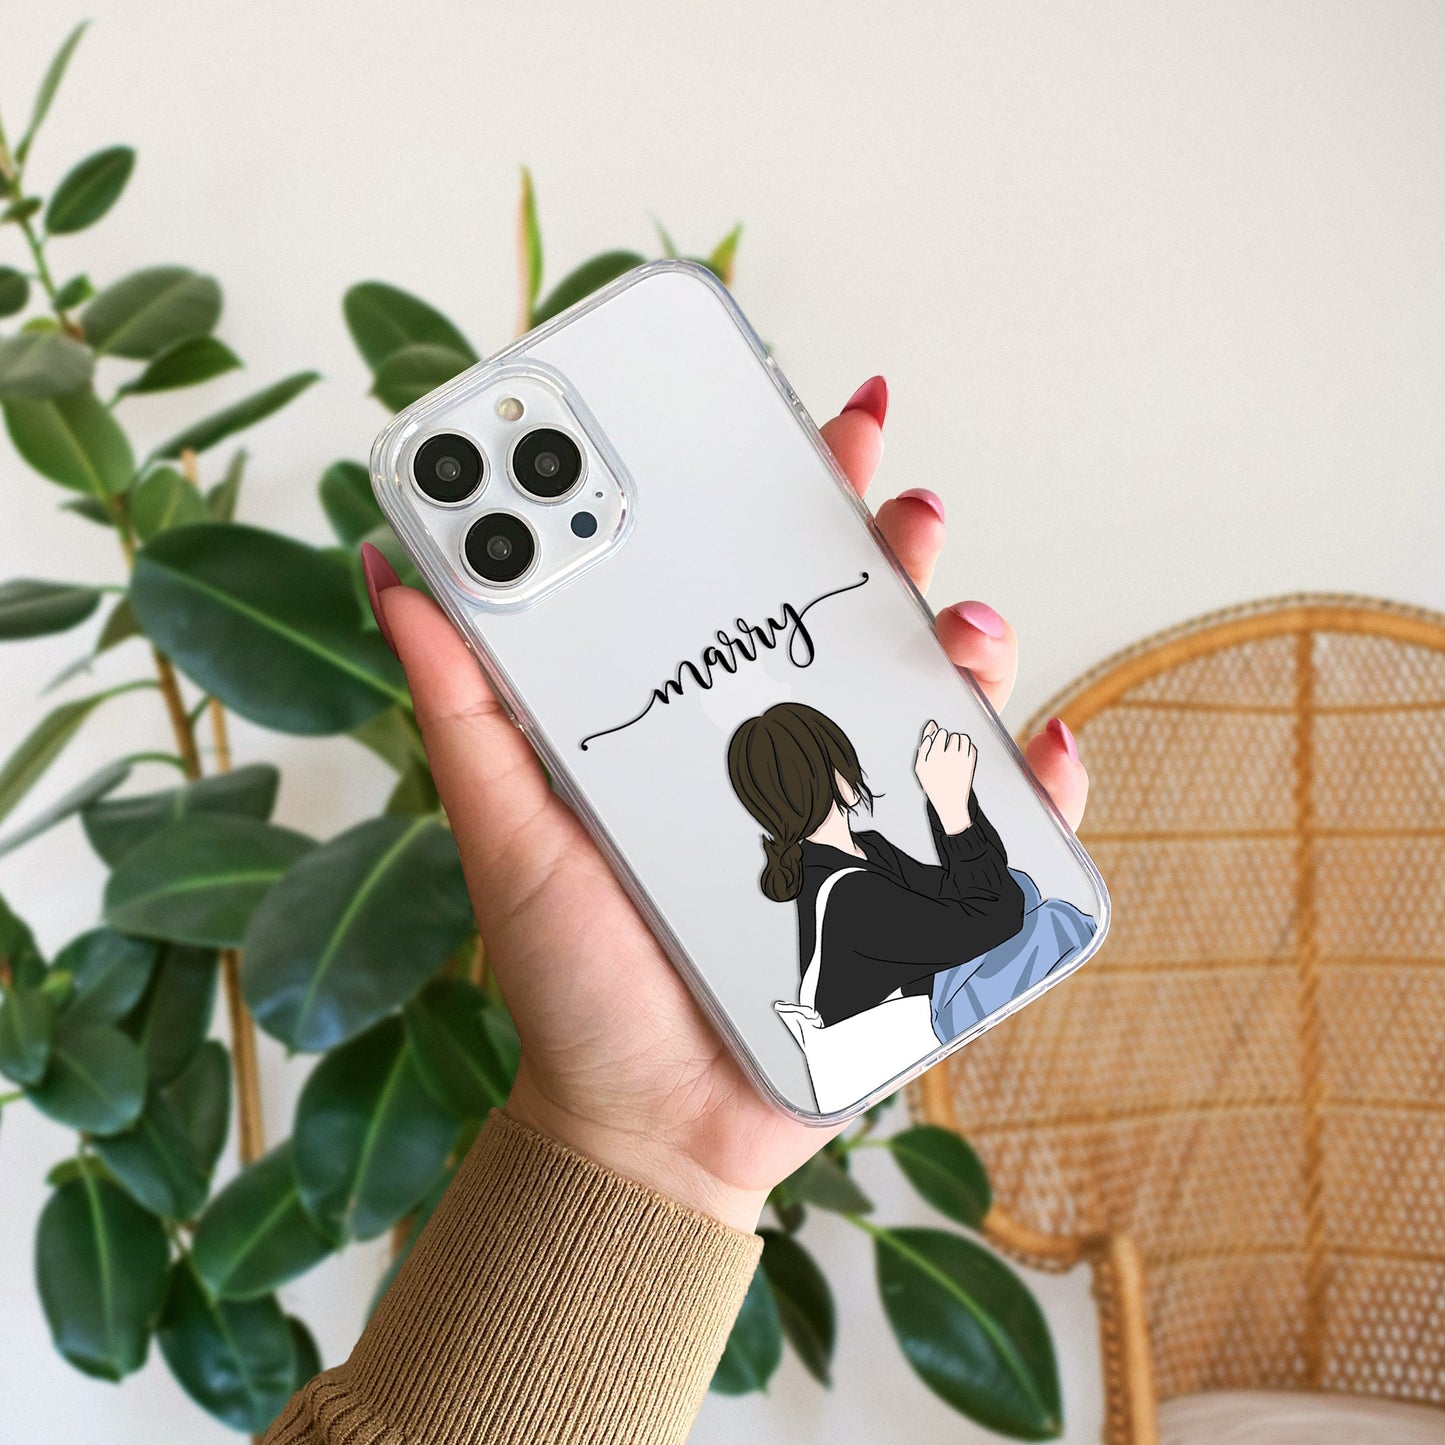 Relax Mood Customize Transparent Silicon Case For Motorola